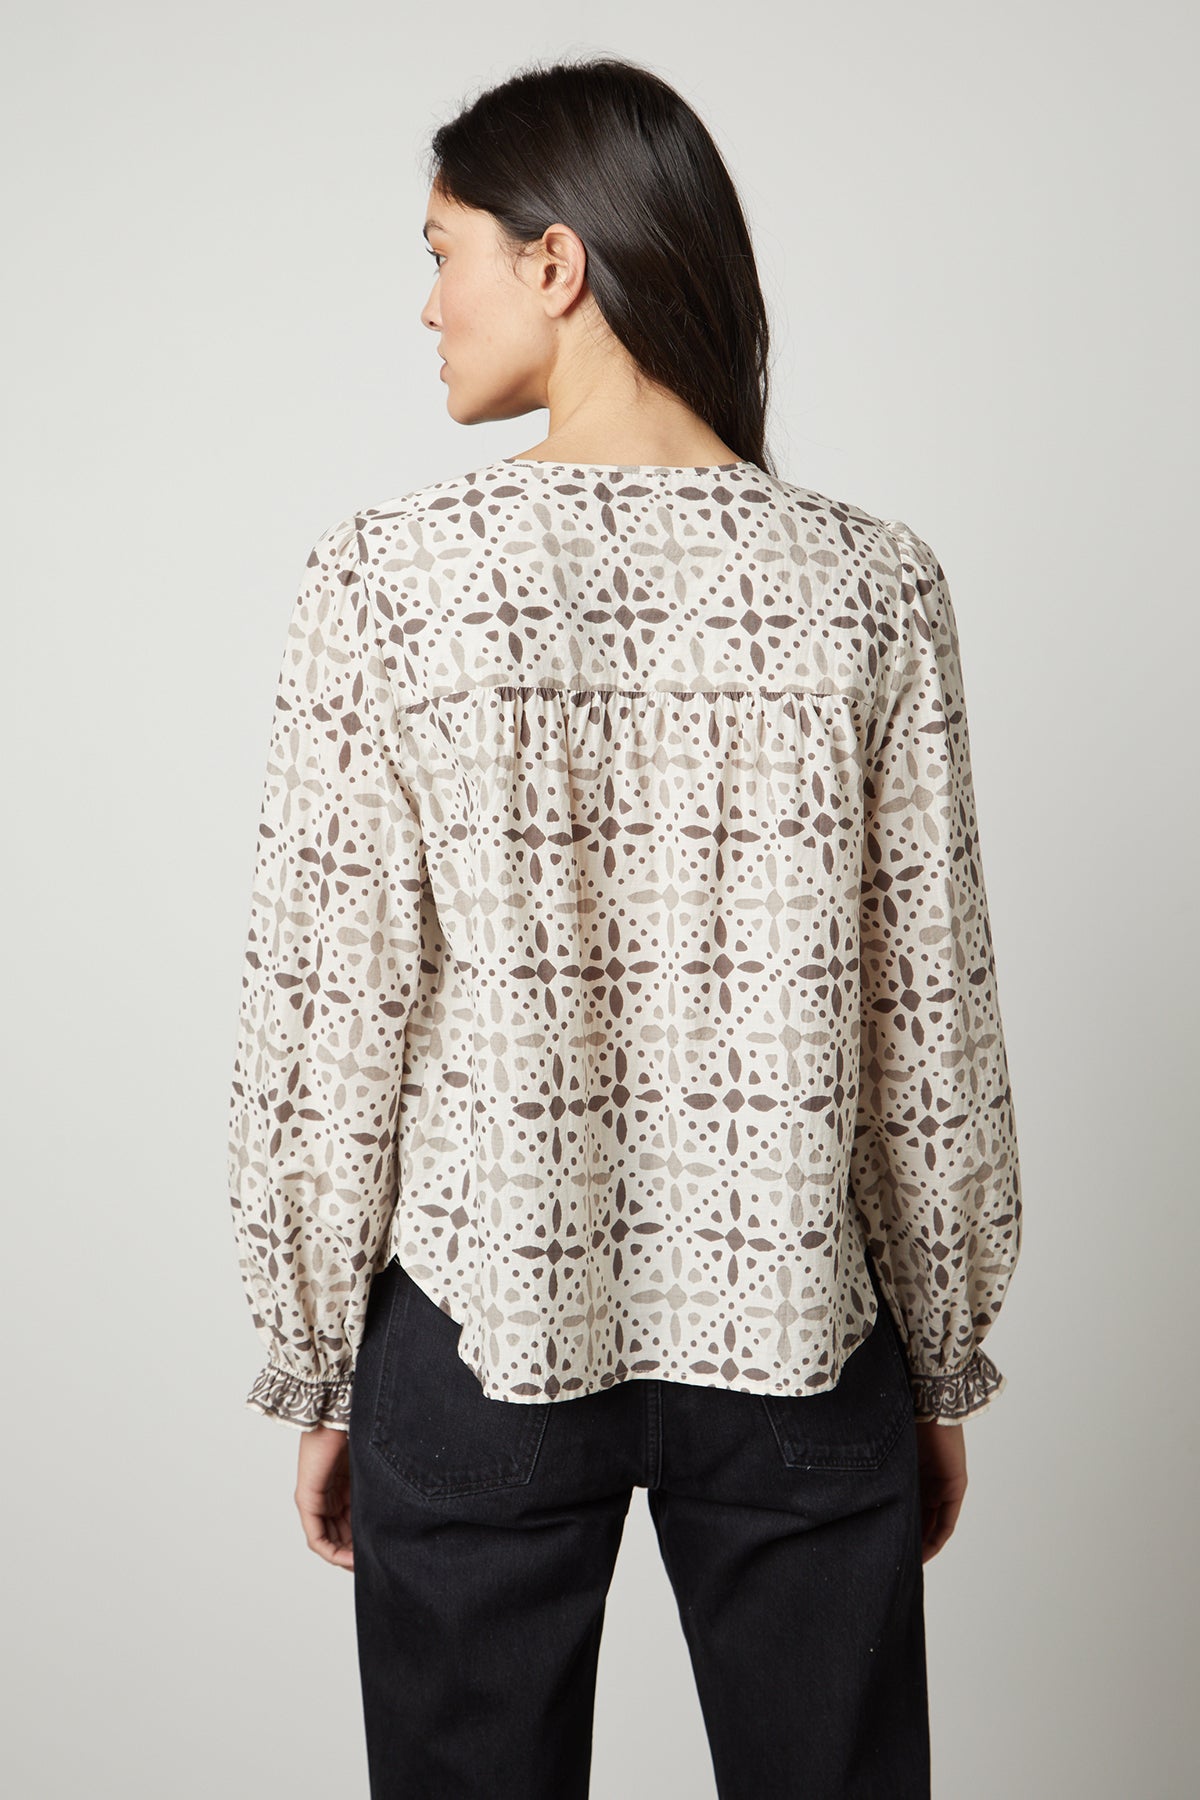   The back view of a woman wearing the Velvet by Graham & Spencer AUDETTE PRINTED BOHO TOP with a geometric pattern in earth tones. 